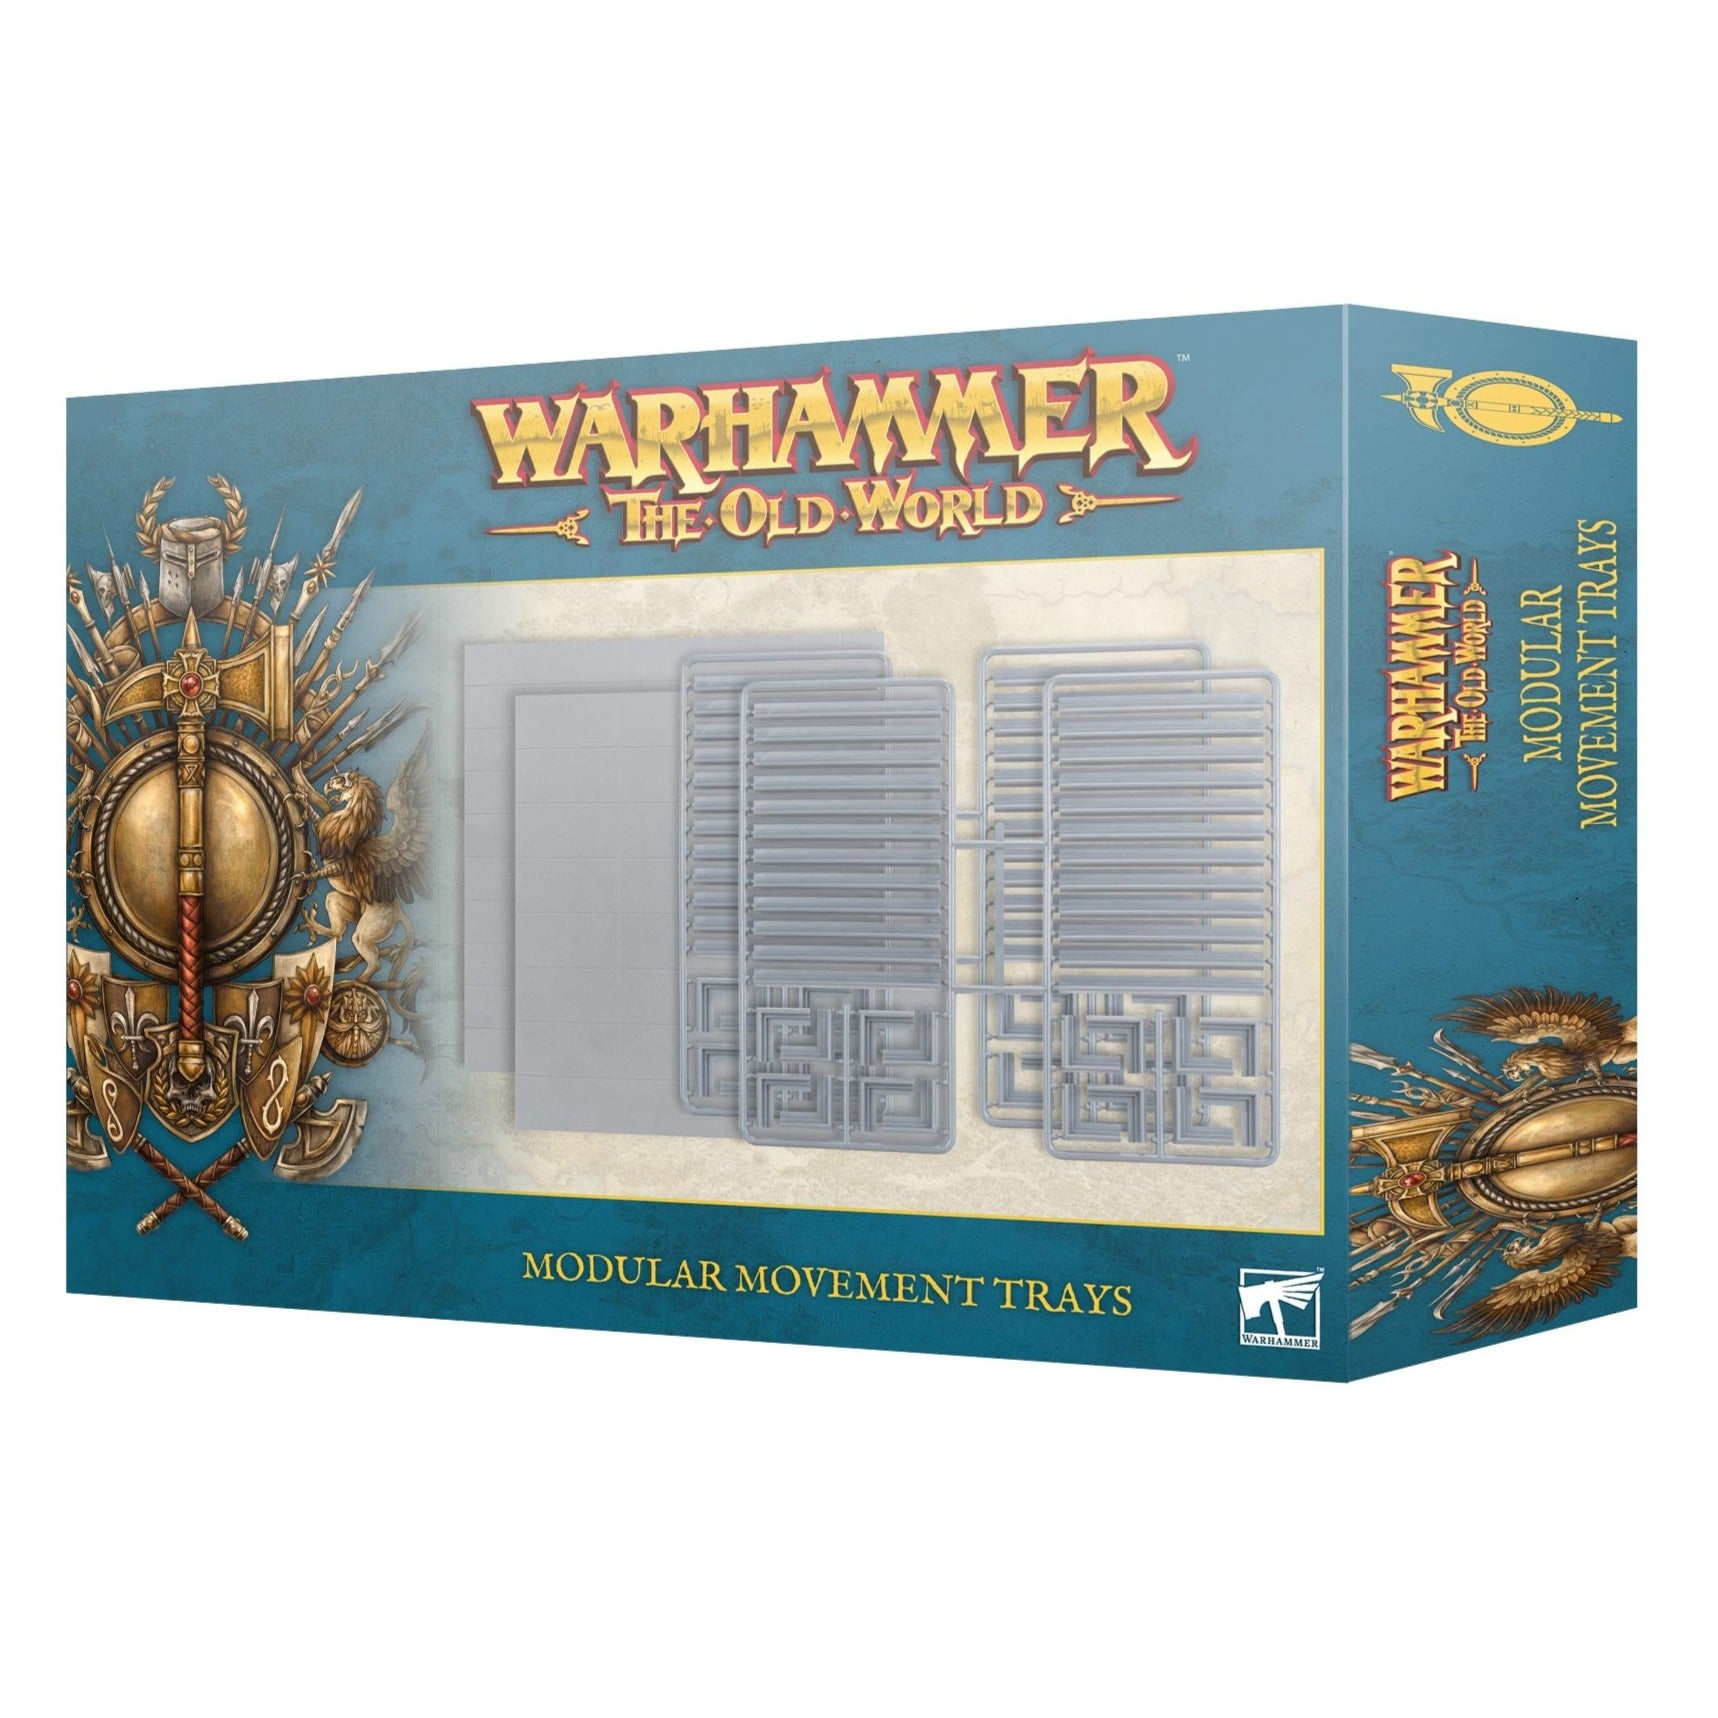 Warhammer: The Old World - Modular Movement Trays - Release Date 20/1/24 - Loaded Dice Barry Vale of Glamorgan CF64 3HD